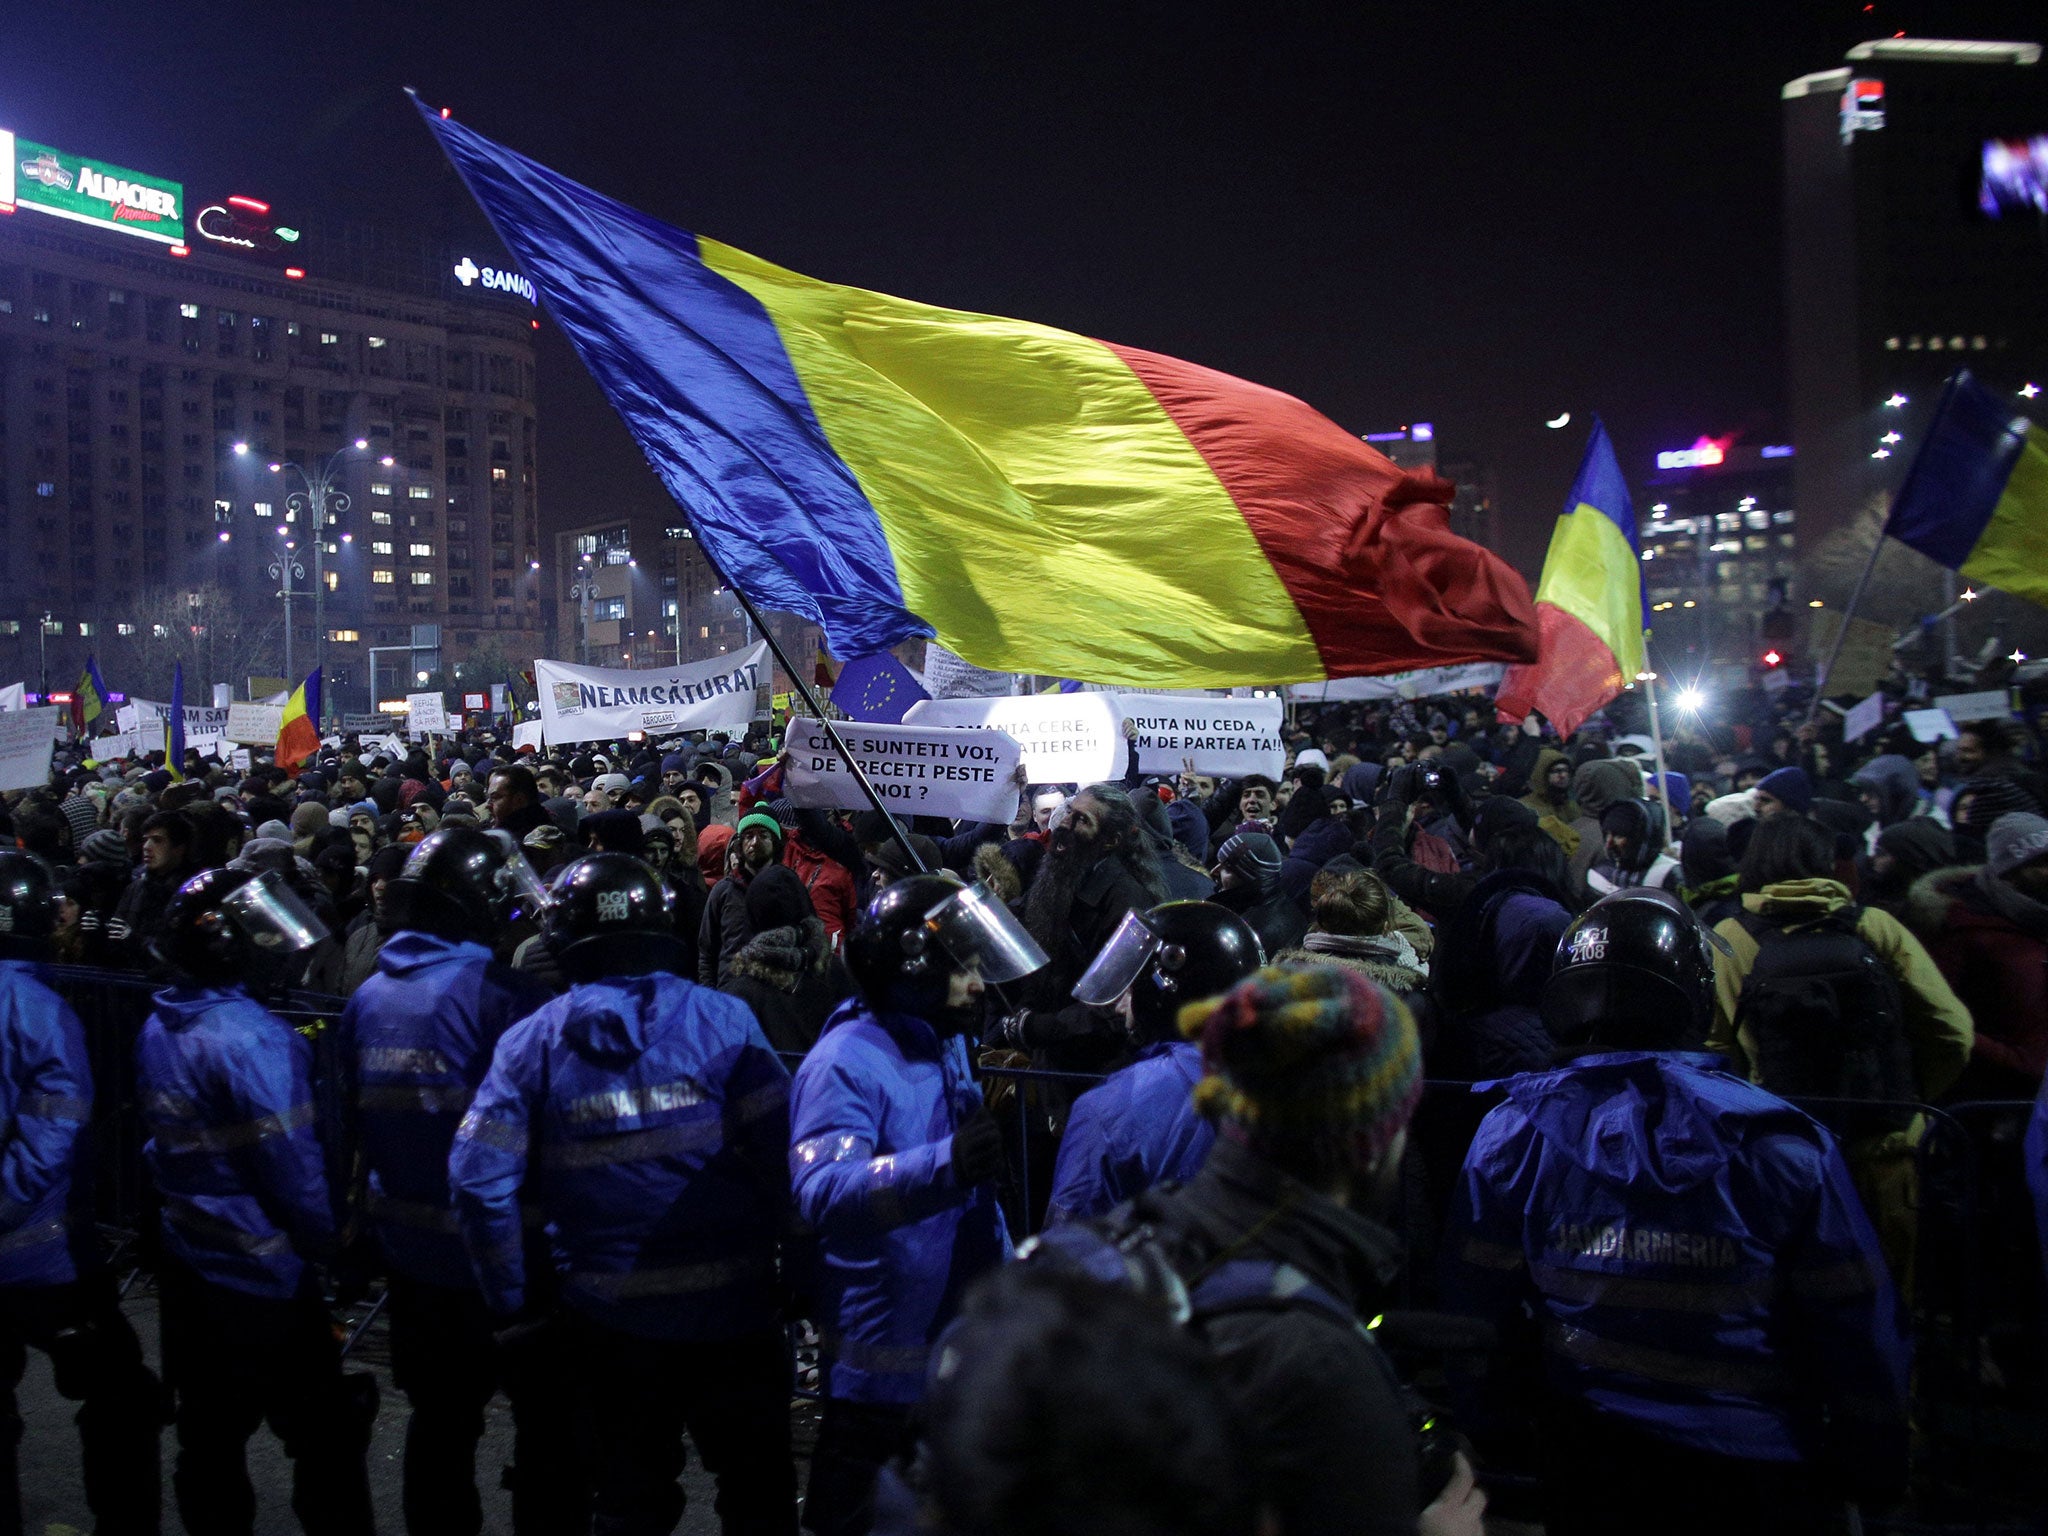 Emergency order triggered some of the biggest nationwide protests since the fall of communist dictator Nicolae Ceausescu in 1989